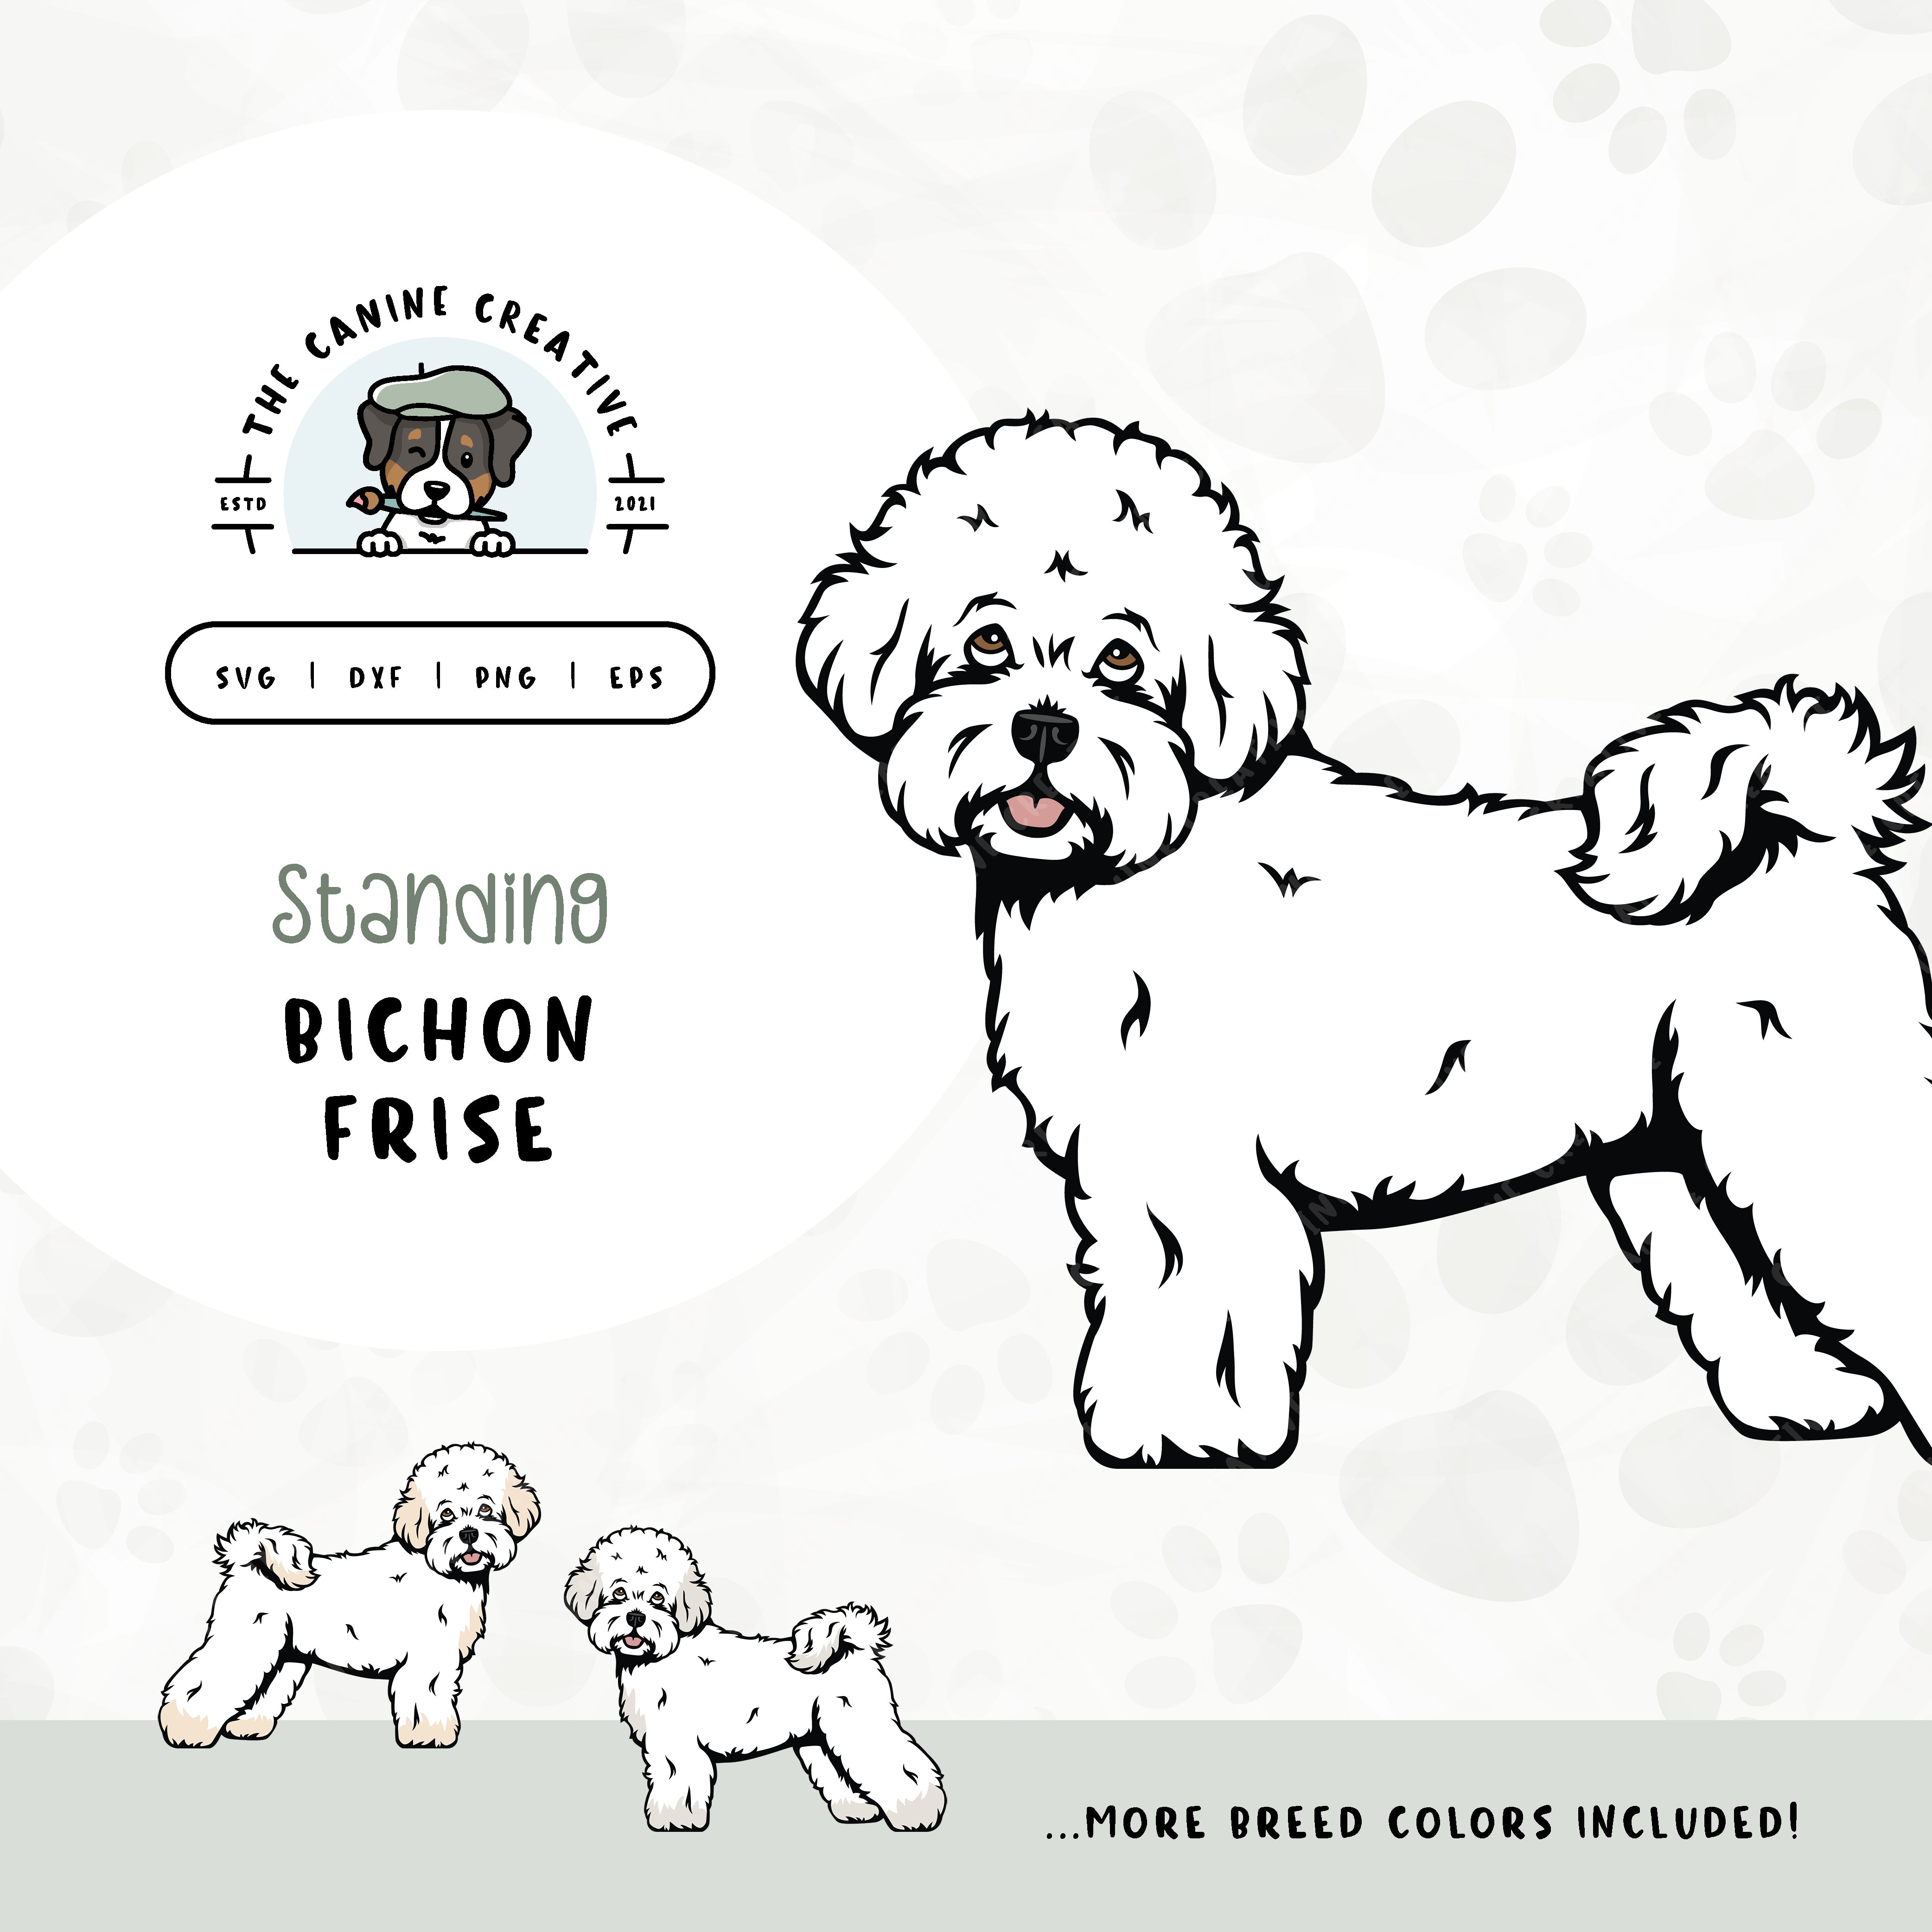 This standing dog design features a Bichon Frise. File formats include: SVG, DXF, PNG, and EPS.